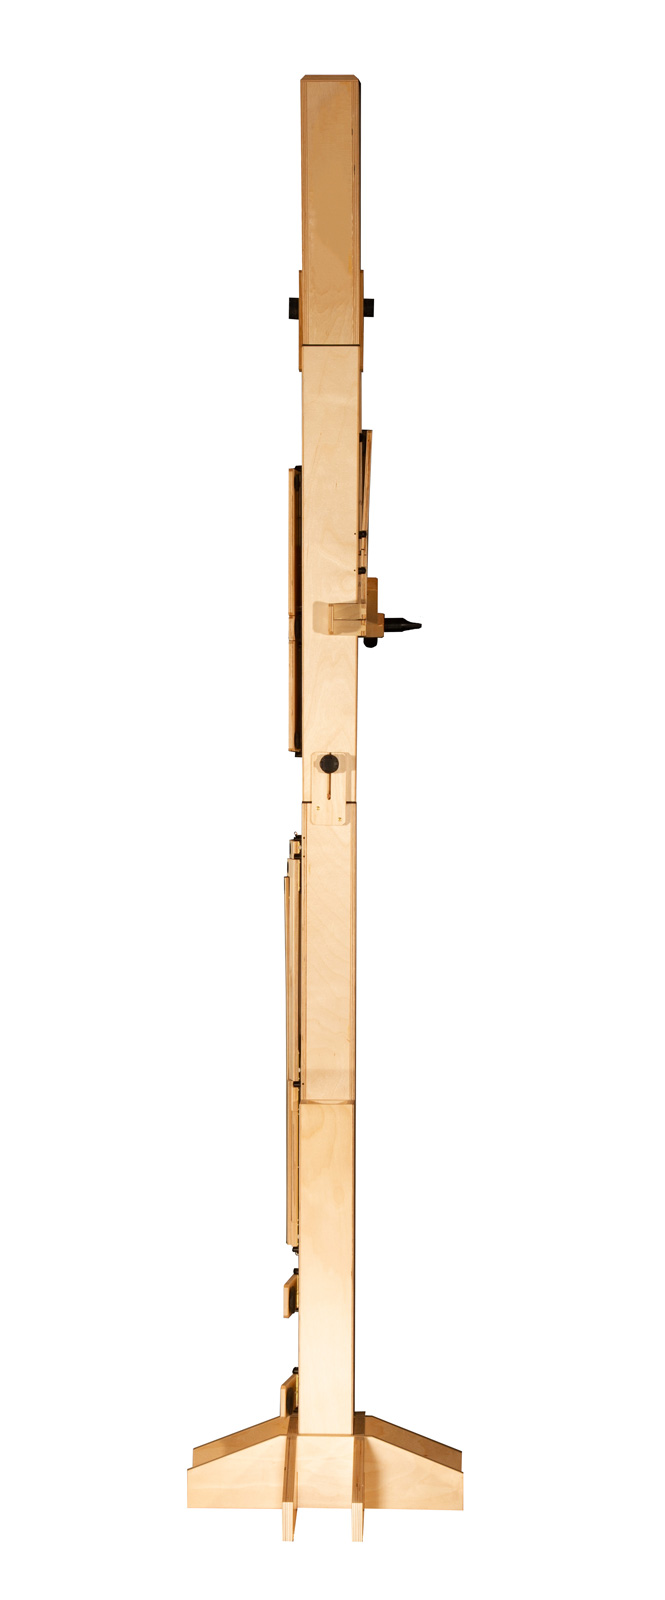 Paetzold by Kunath, subcontrabass in F, "Master", "HP Original", 442 Hz, natural, birch plywood